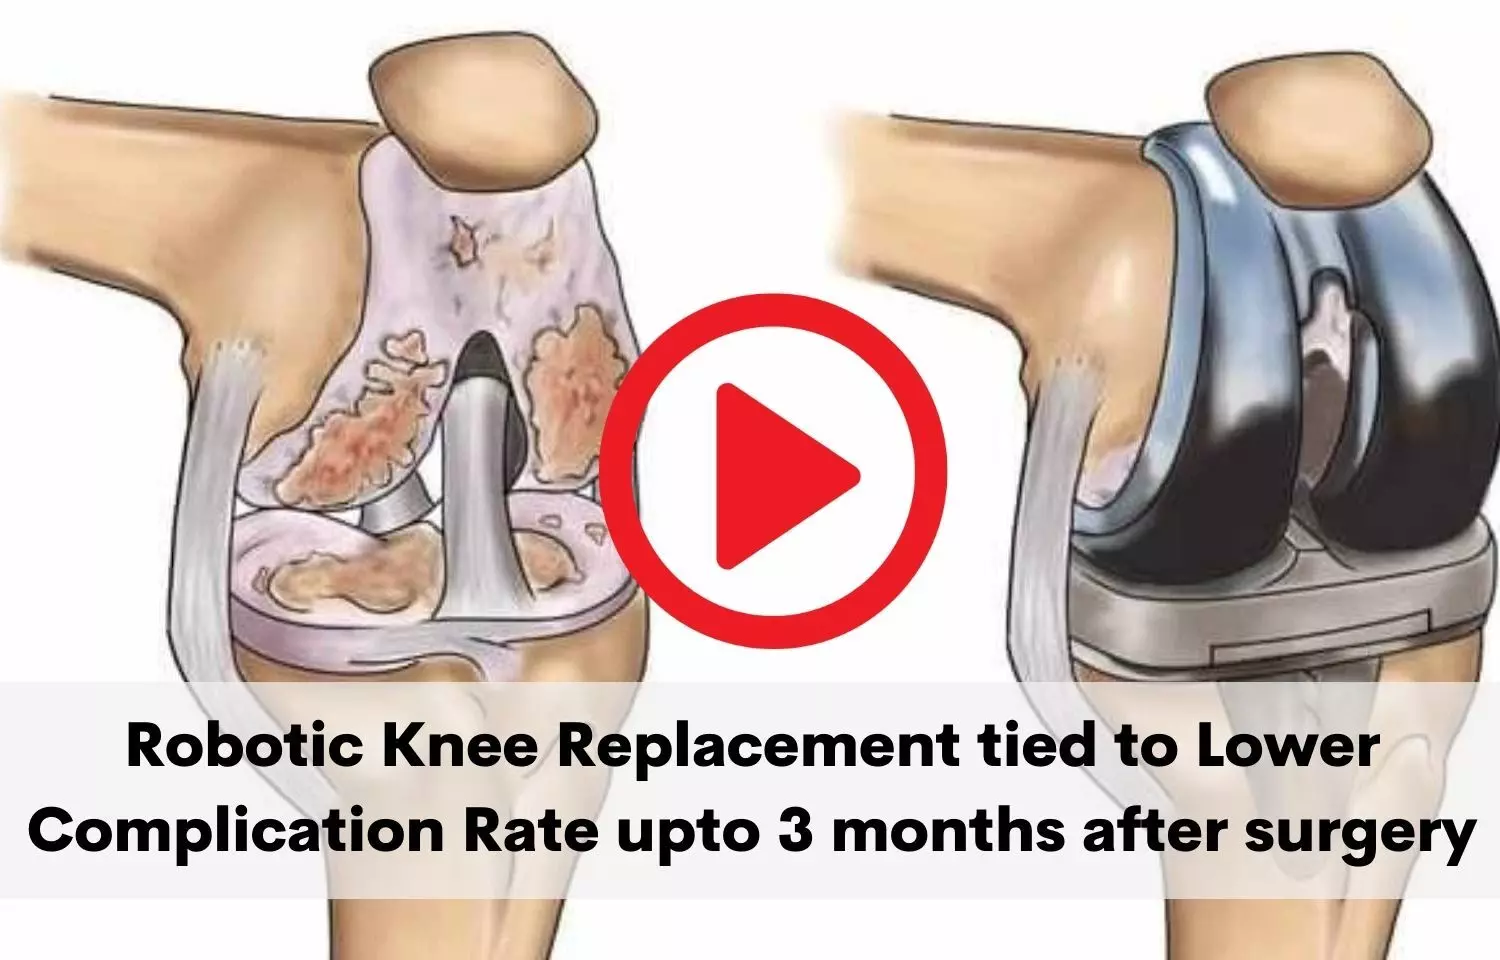 Robotic knee replacement reduces complication risk upto 3 months